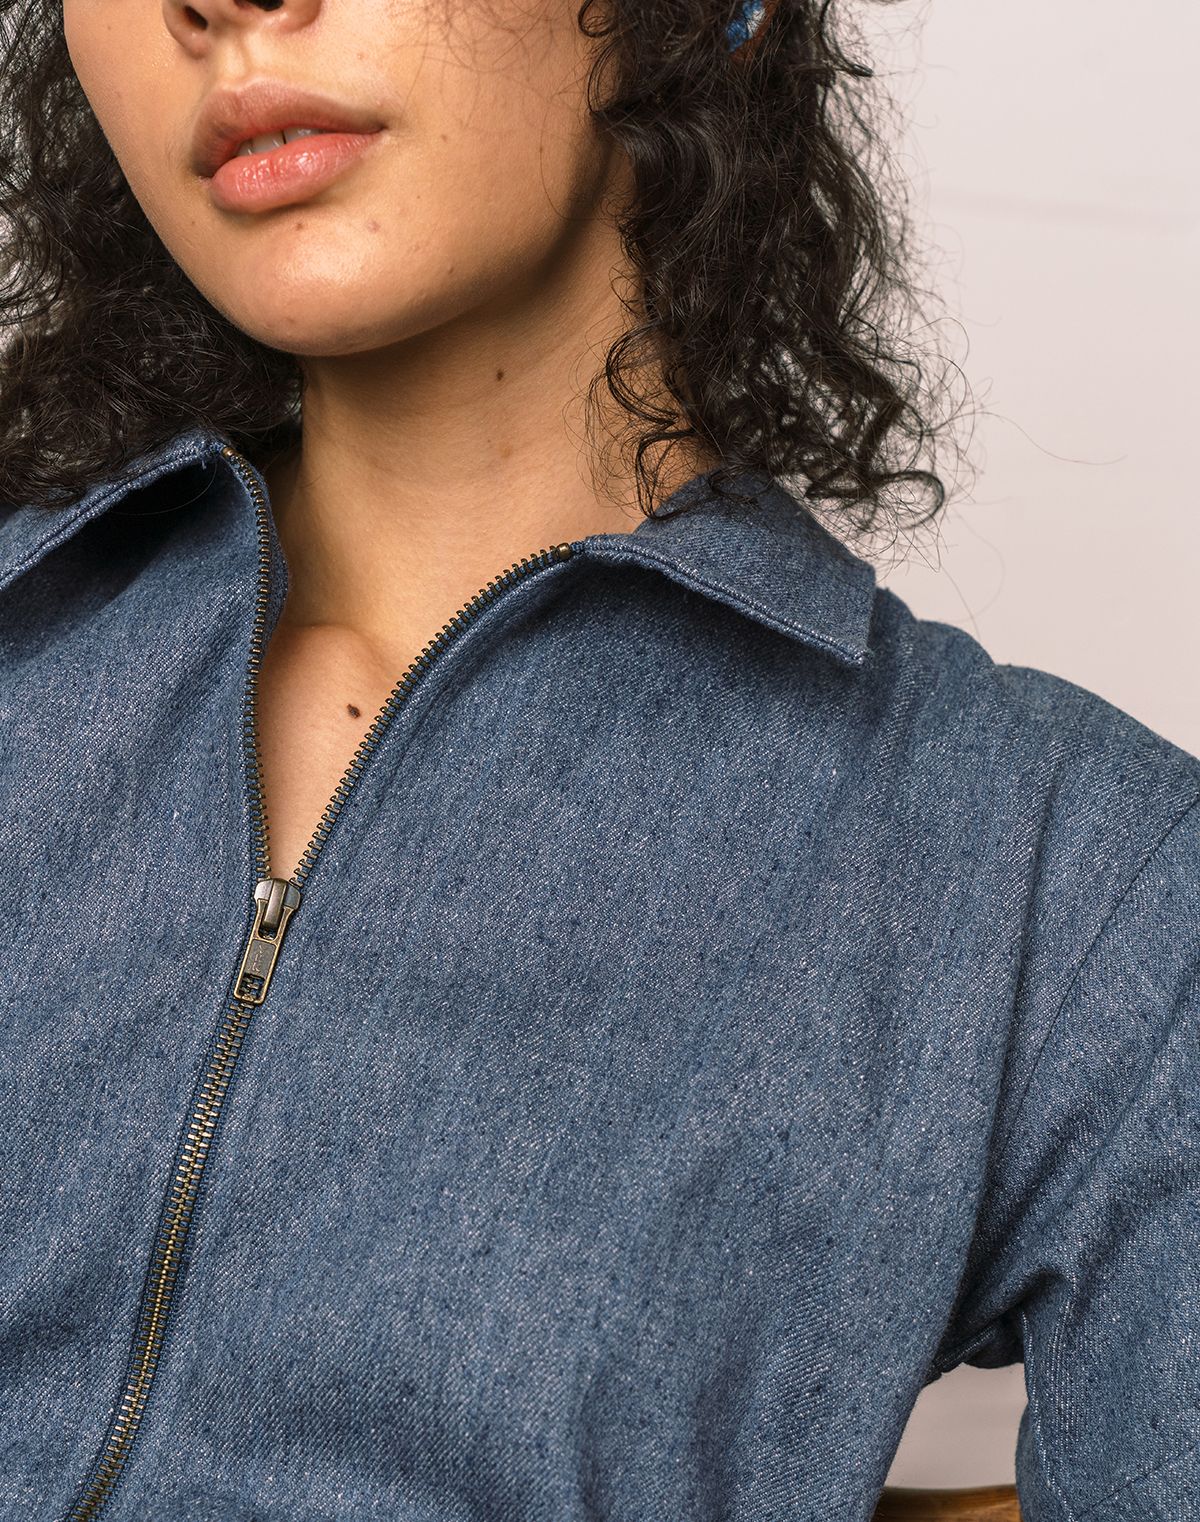 Noble's signature Utility Suit is finally available for adults to make all of your twinning jumpsuit dreams come true. Made in Peru with durable yet buttery soft GOTS certified organic Pima cotton canvas.